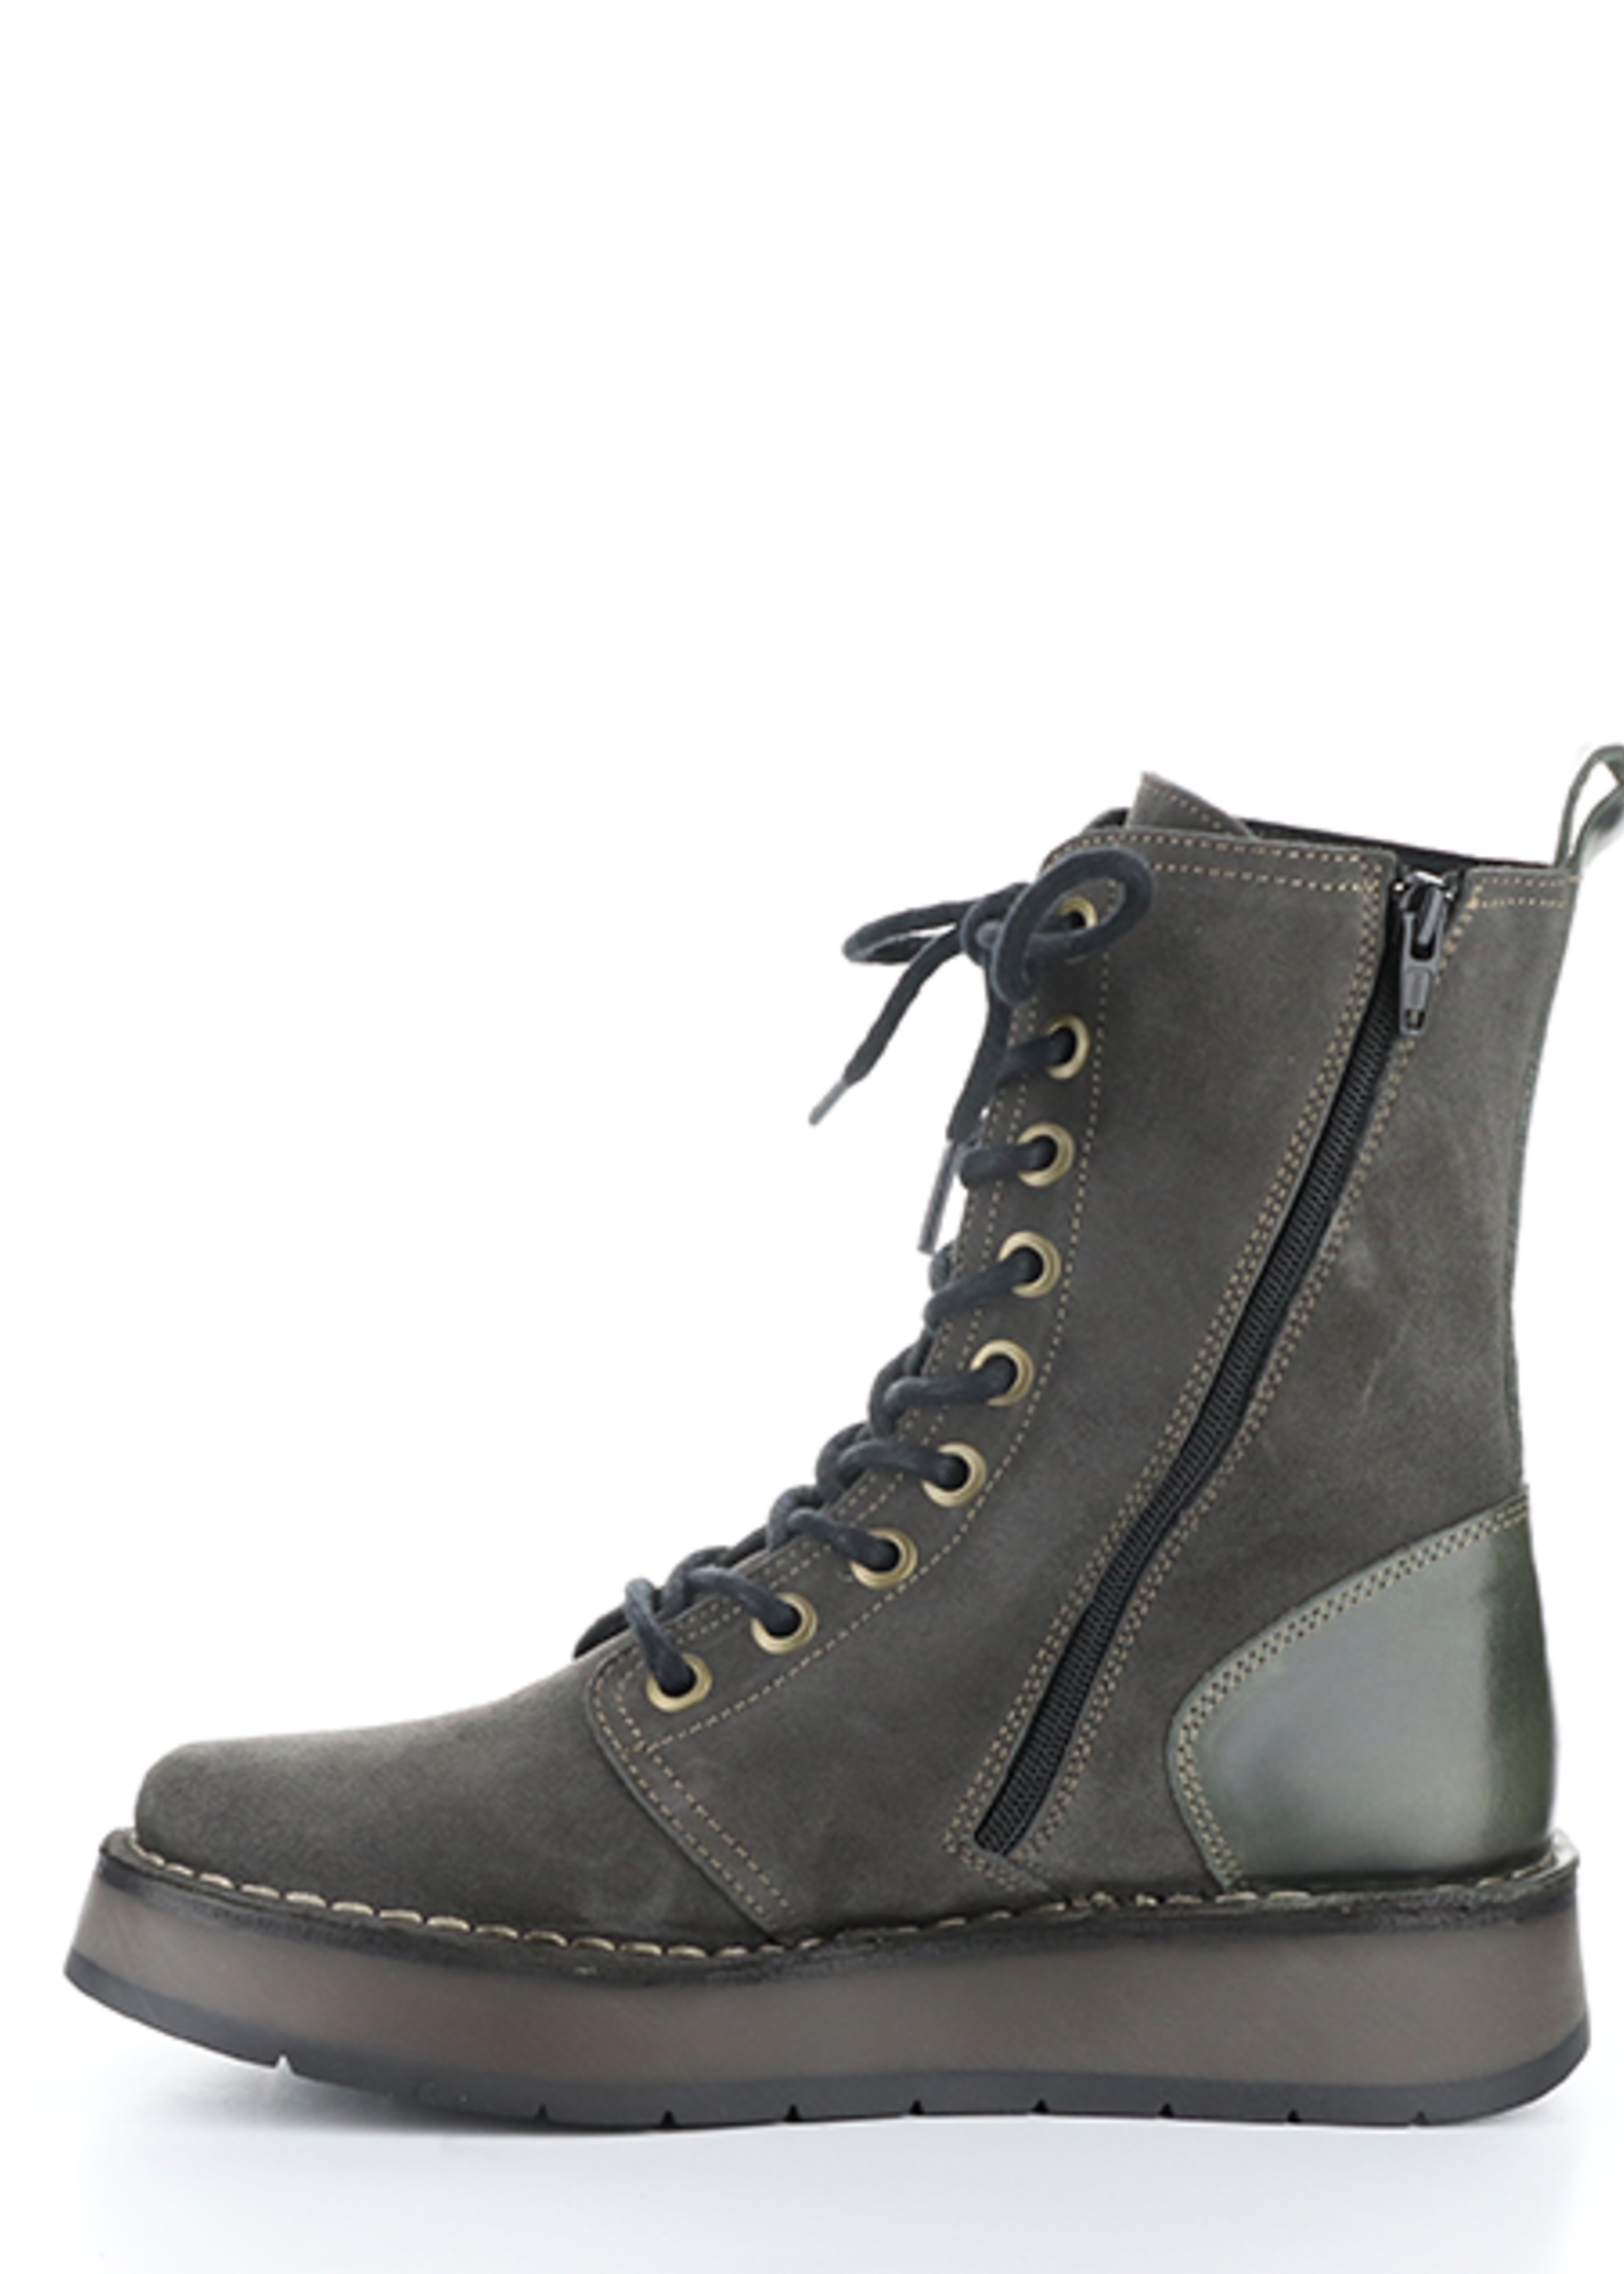 Fly Fly Rami lace up boot w/zip RAMI